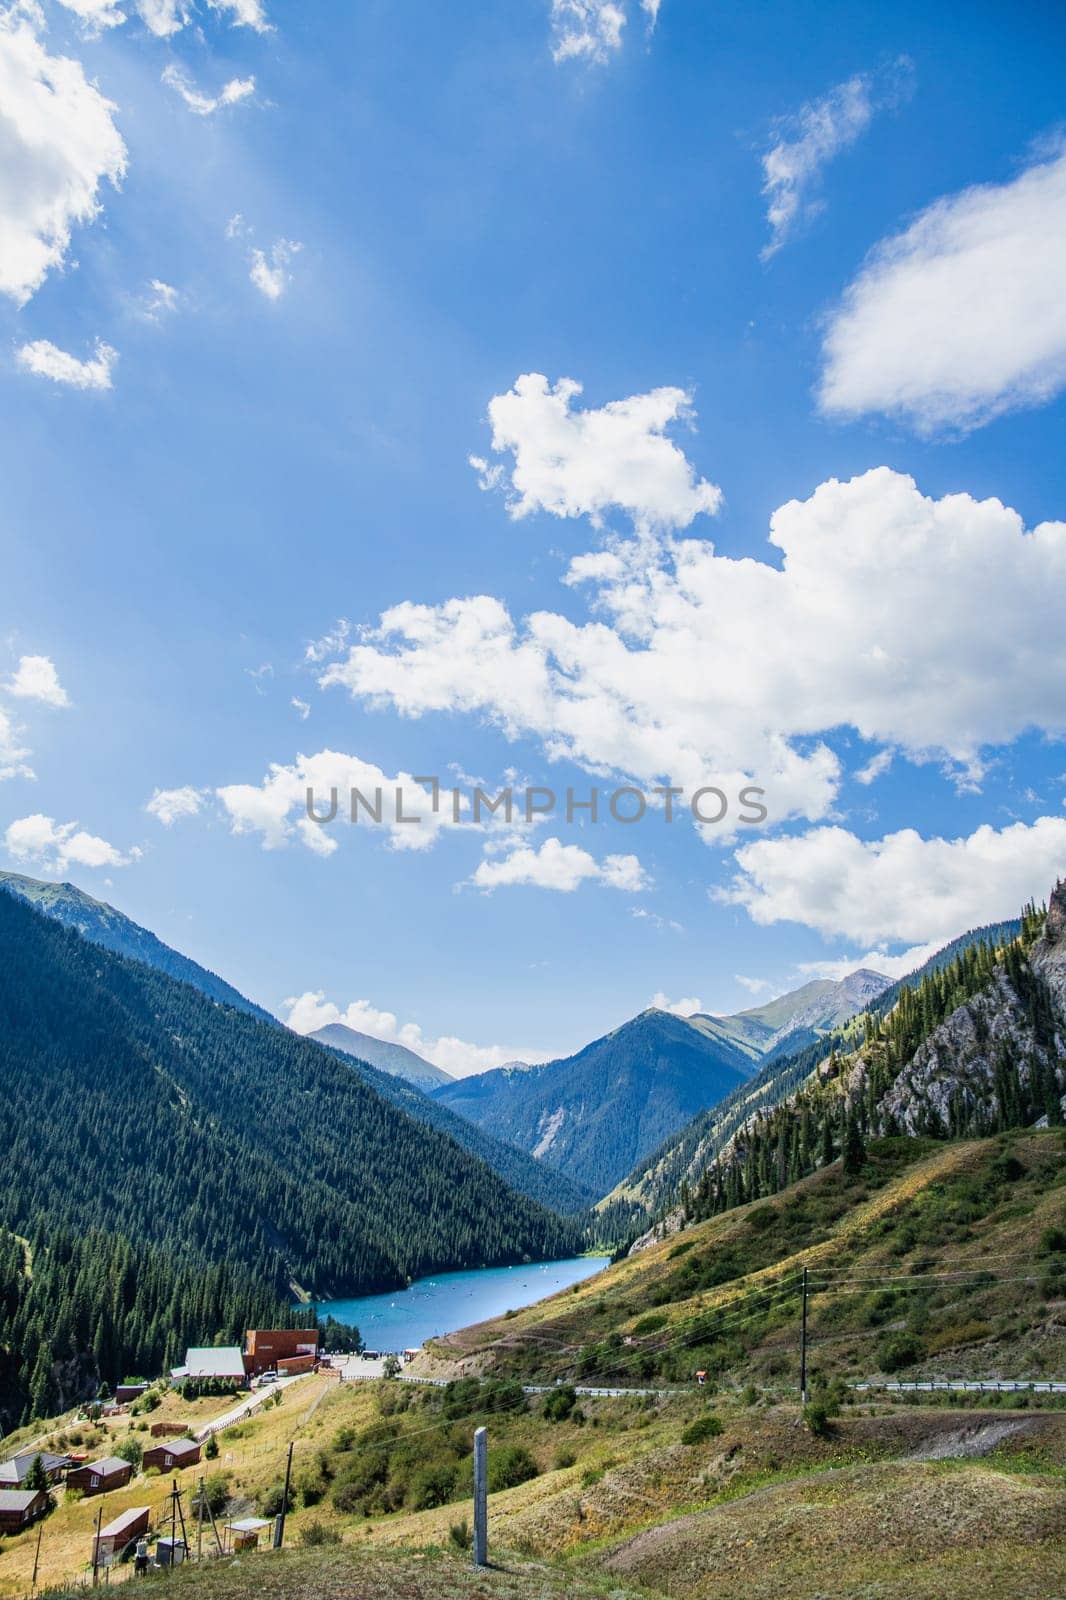 Lower Kolsay mountain lake in the national nature park with blue sky. Near Almaty city in Kazakhstan.